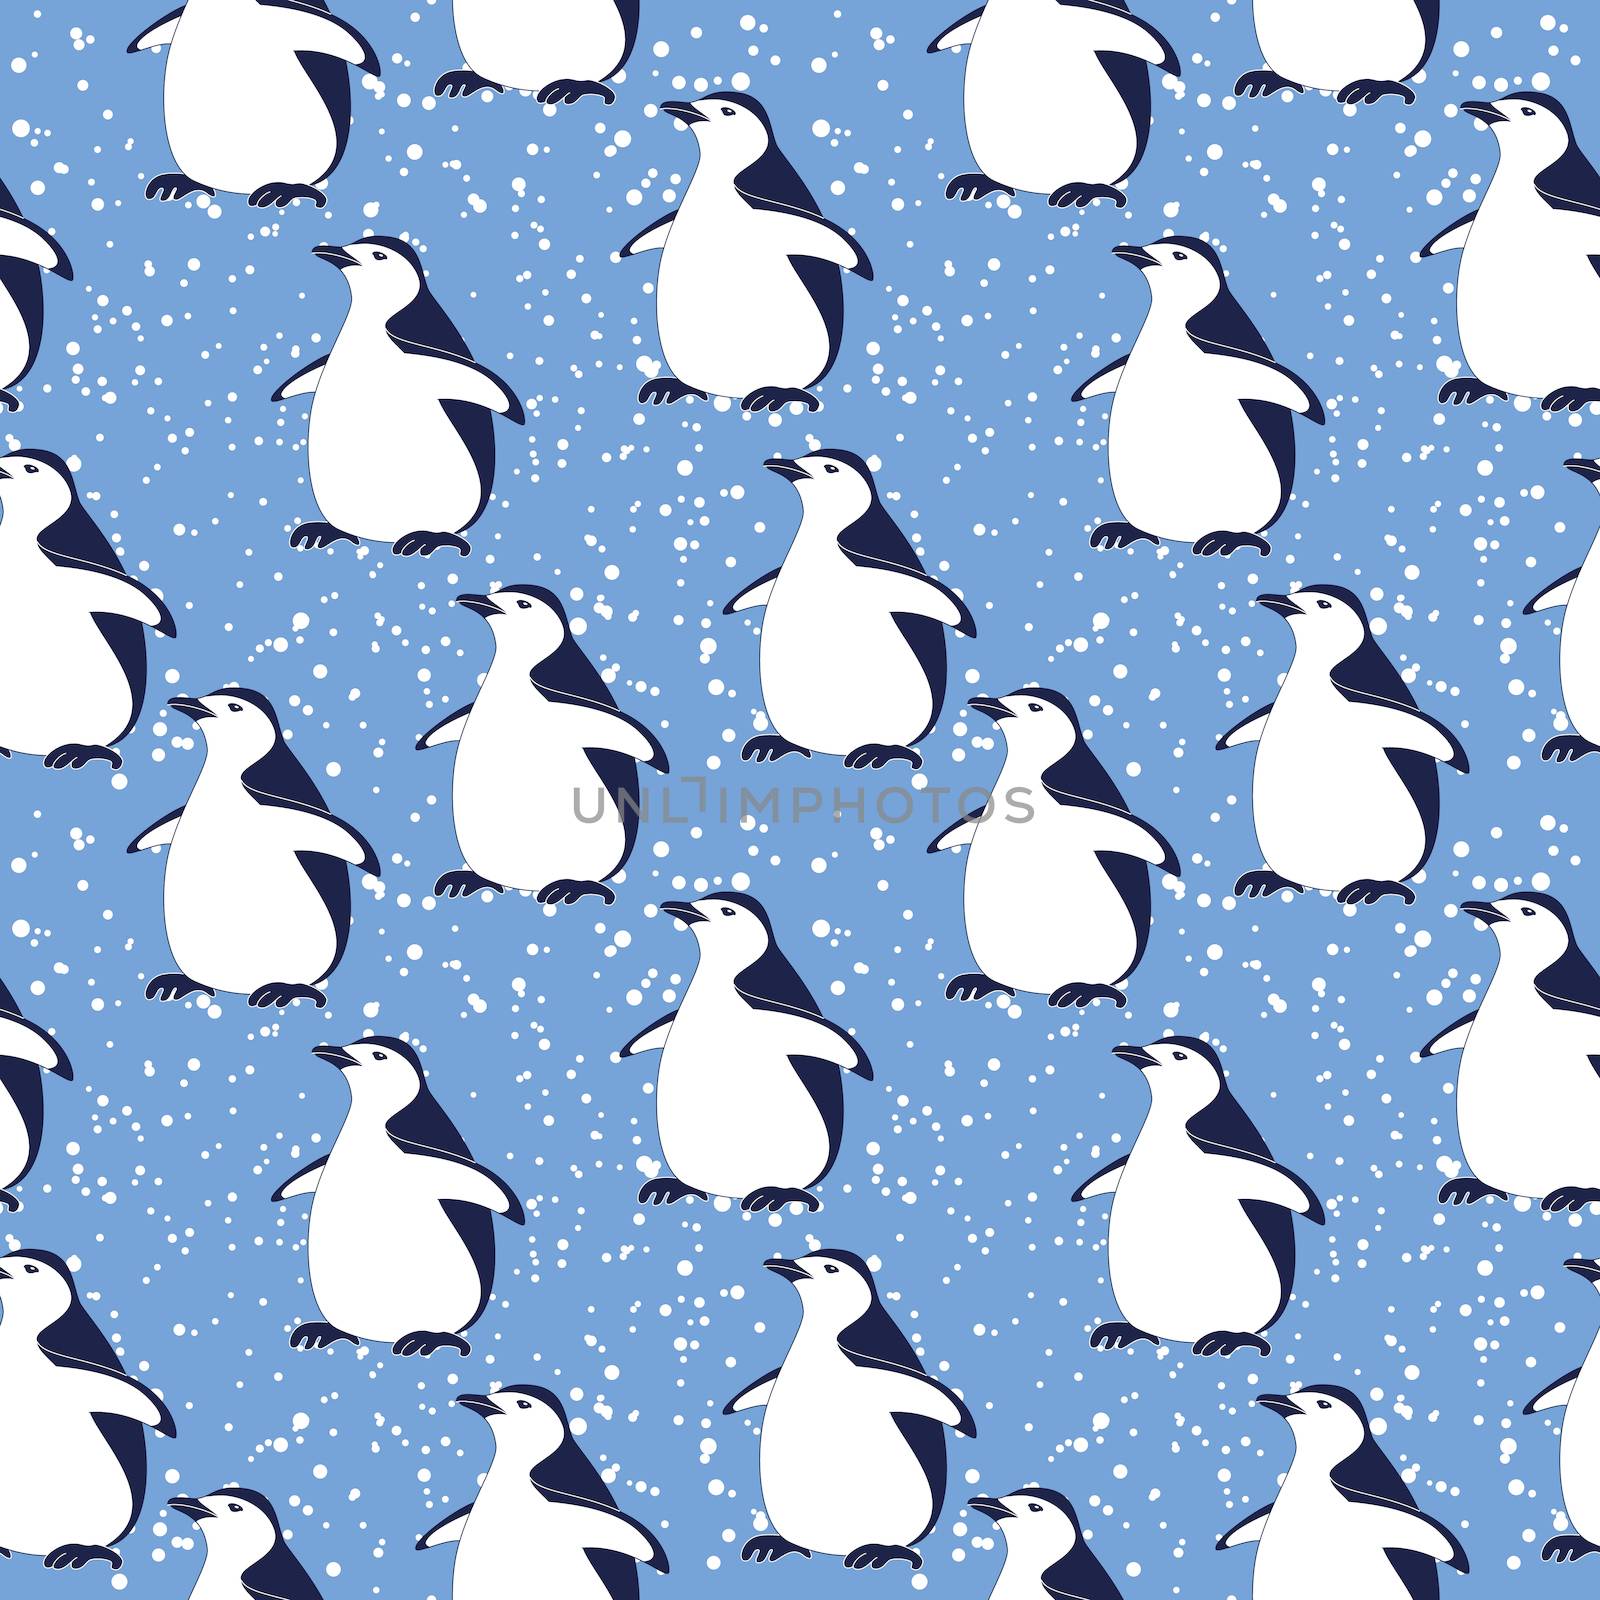 Seamless pattern, penguins and snowflakes by alexcoolok